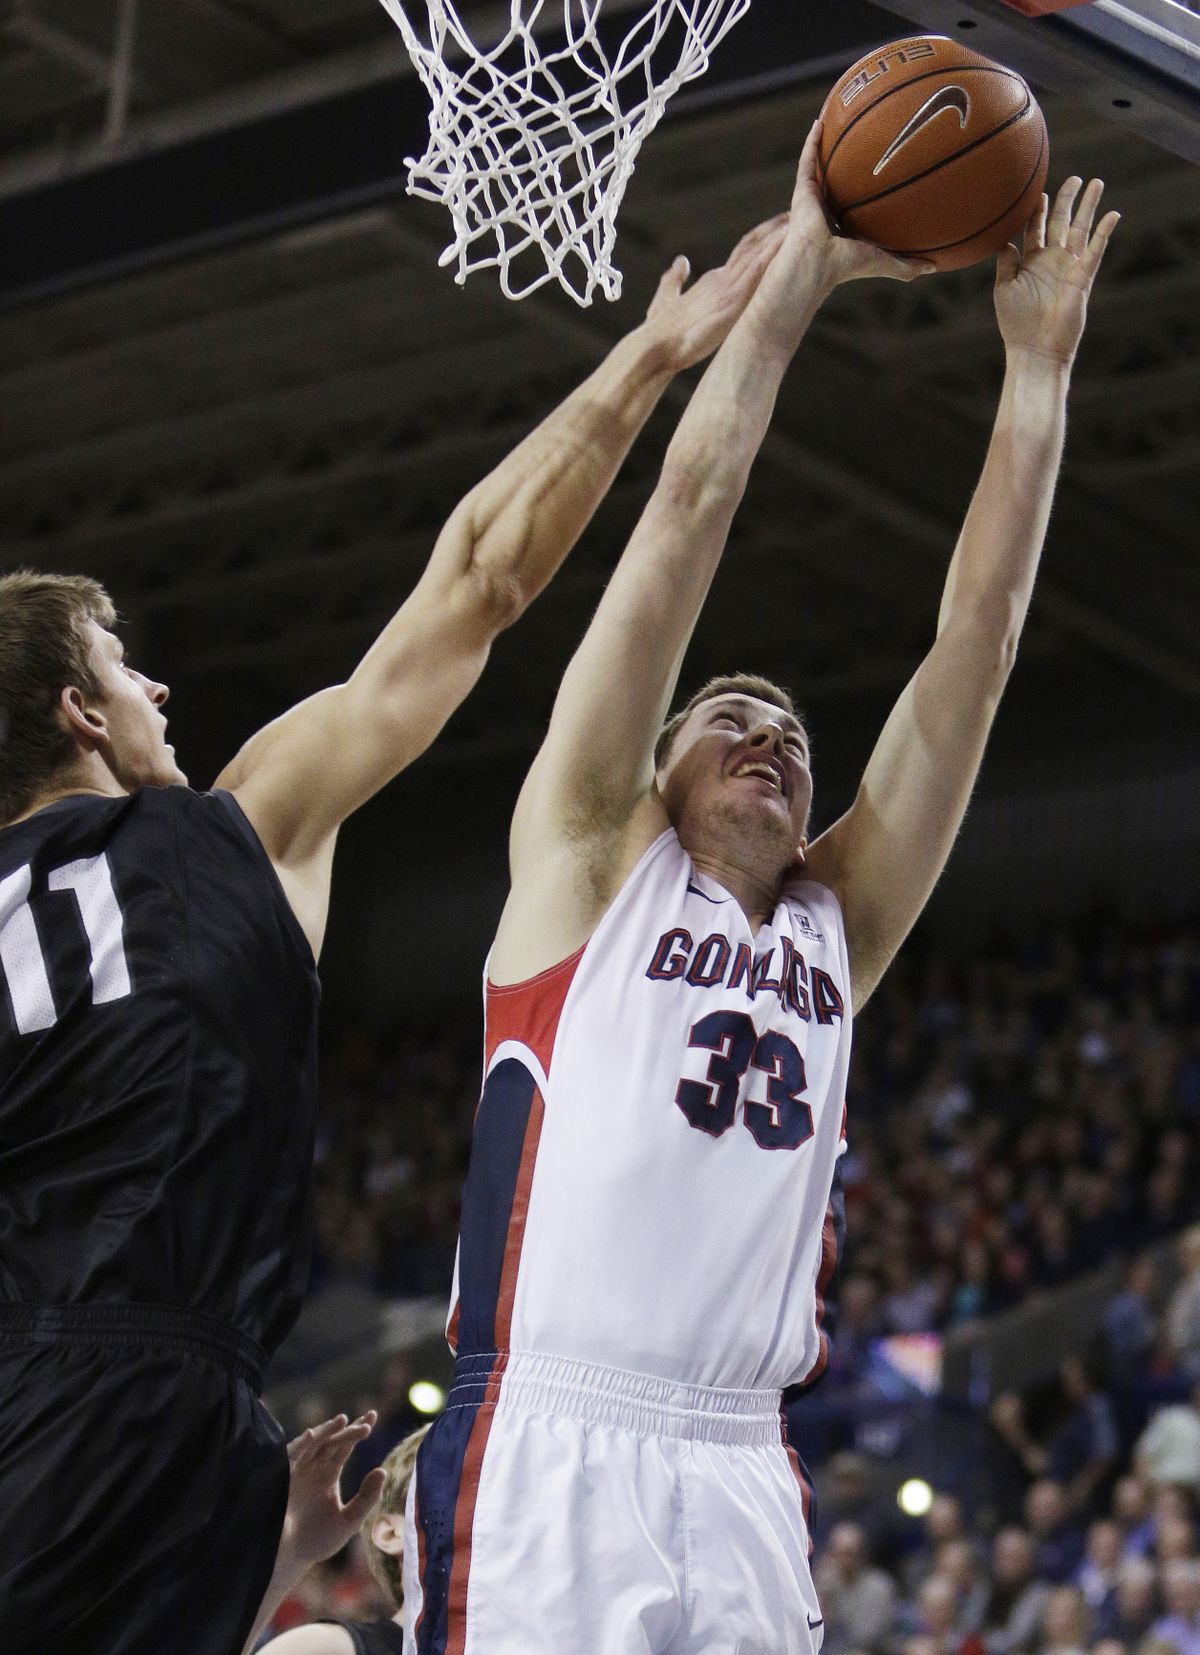 Gonzaga’s Kyle Wiltjer had game highs of 21 points, 10 rebounds in 26 minutes played. (Associated Press)